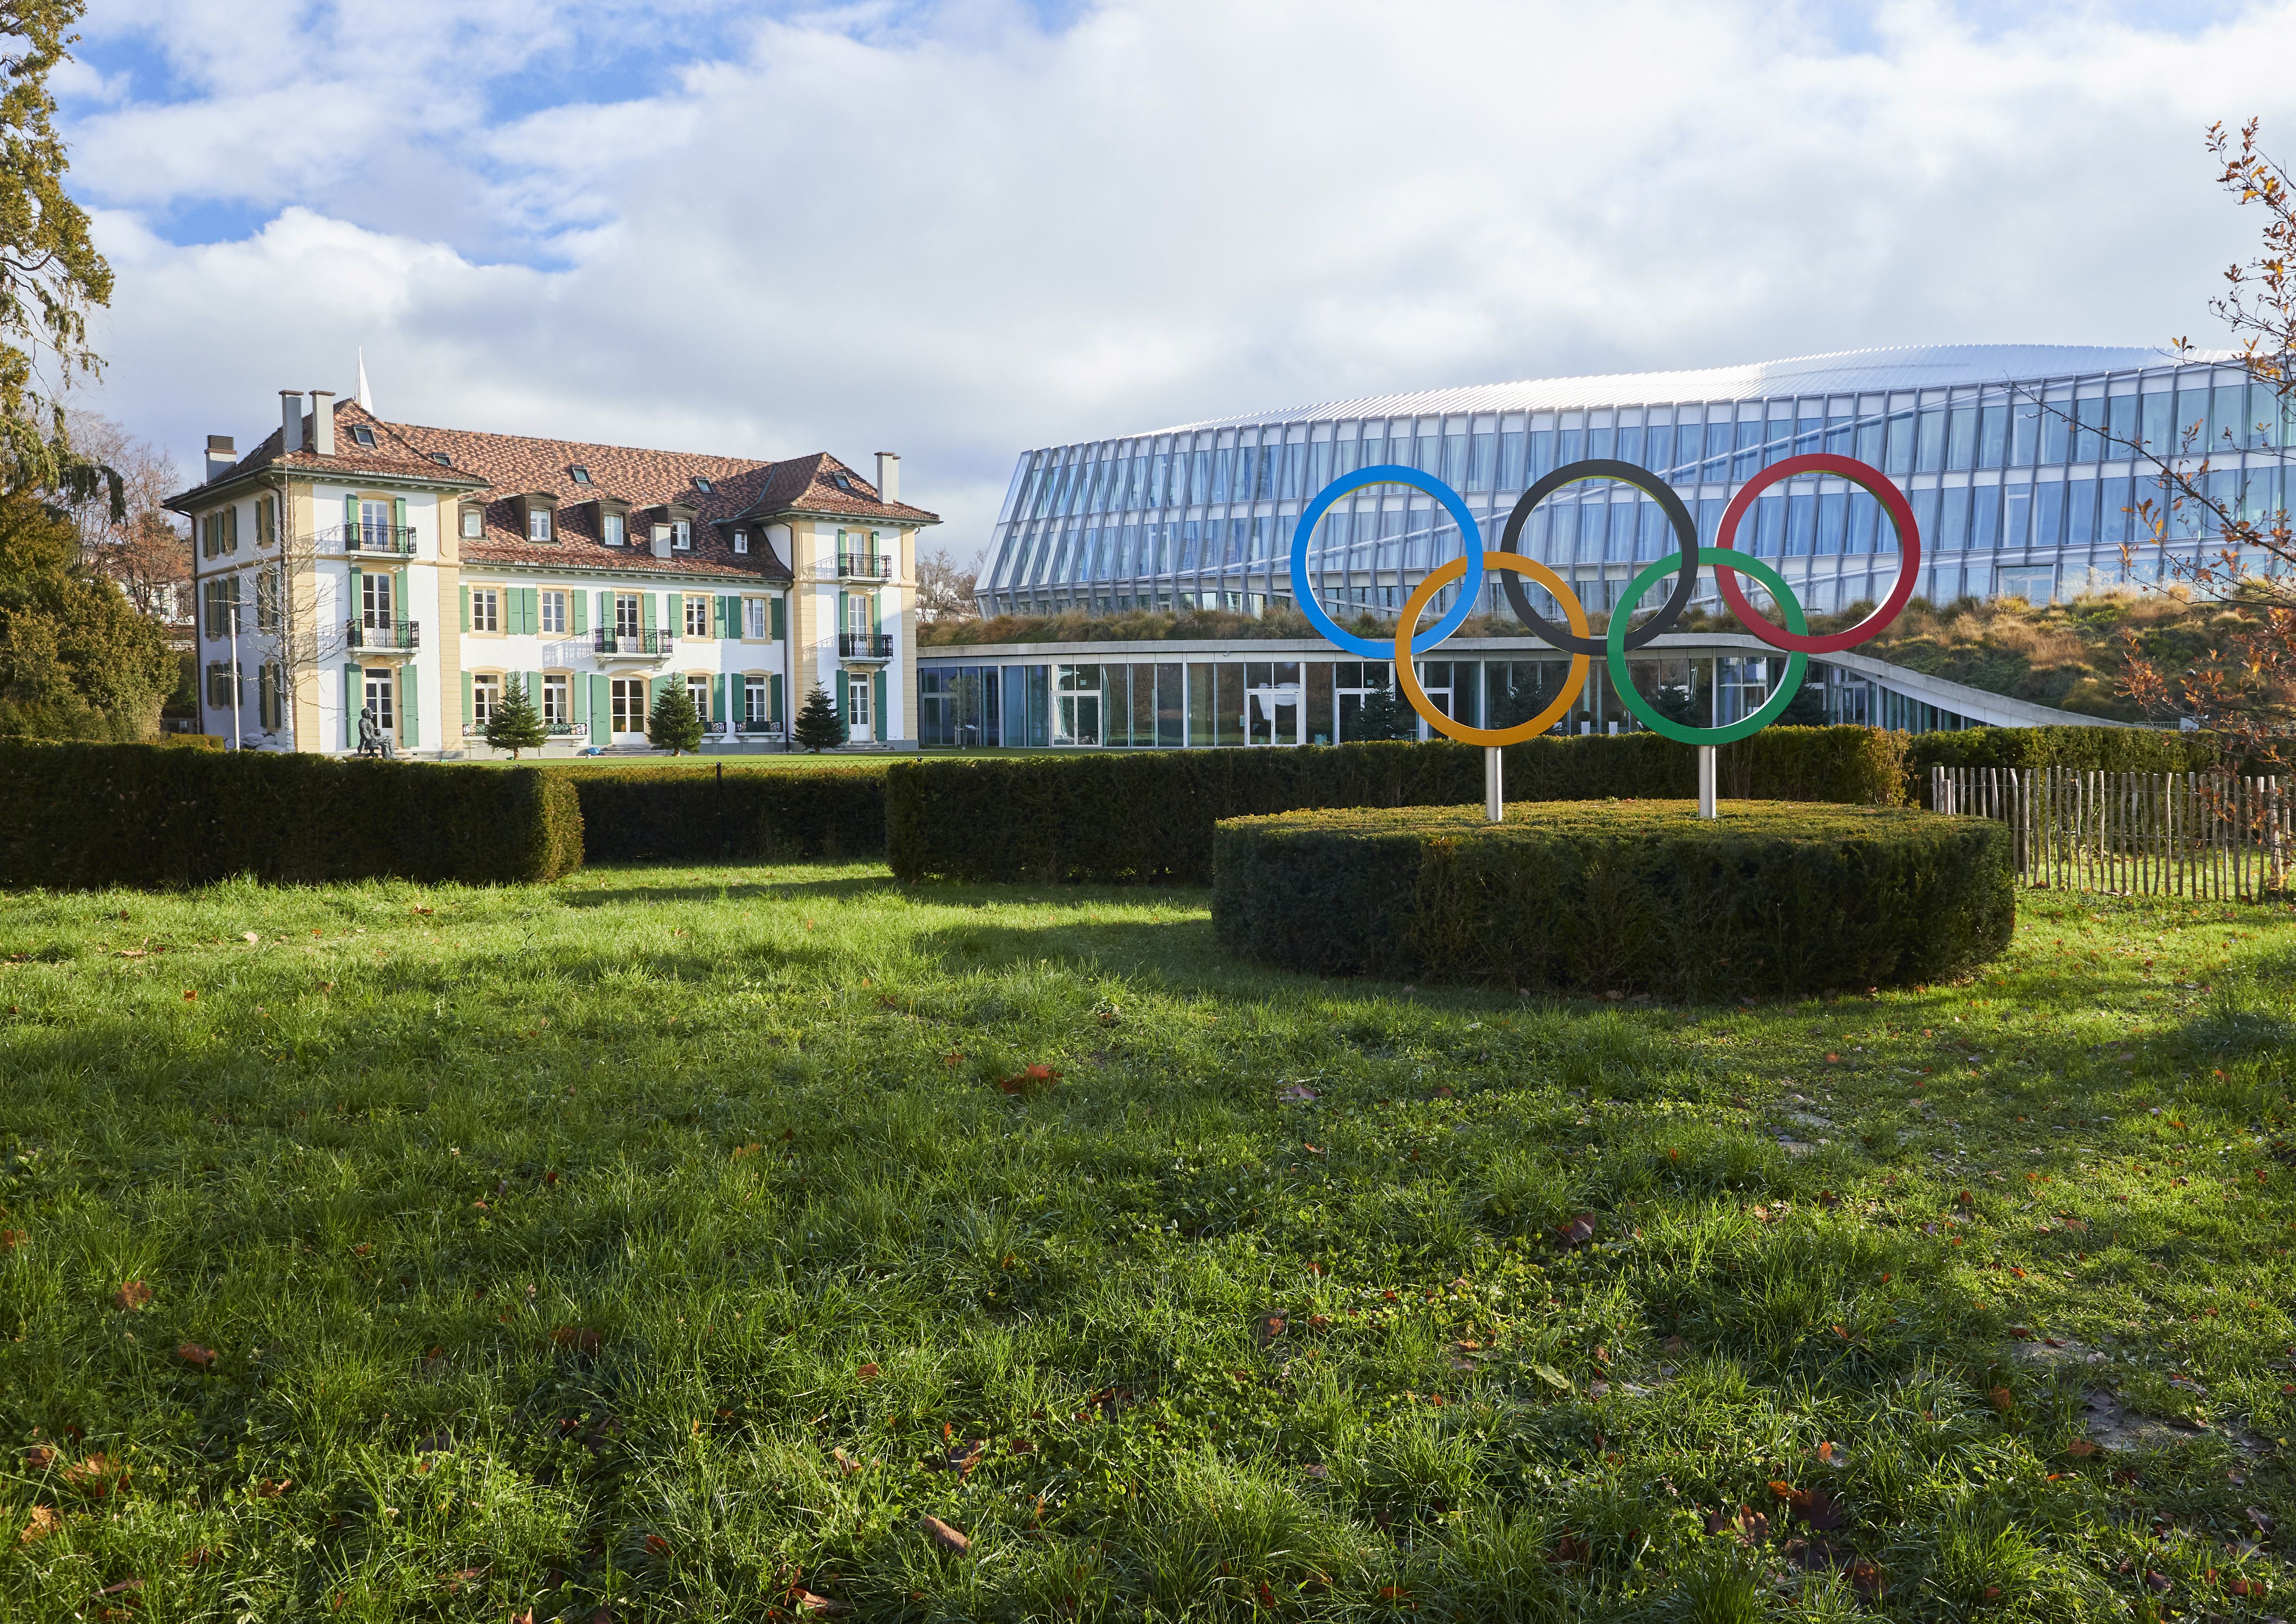 The Olympic rings are pictured in front of the International Olympic Committee (IOC) headquarters in Lausanne, Switzerland, December 7, 2021. REUTERS/Denis?Balibouse